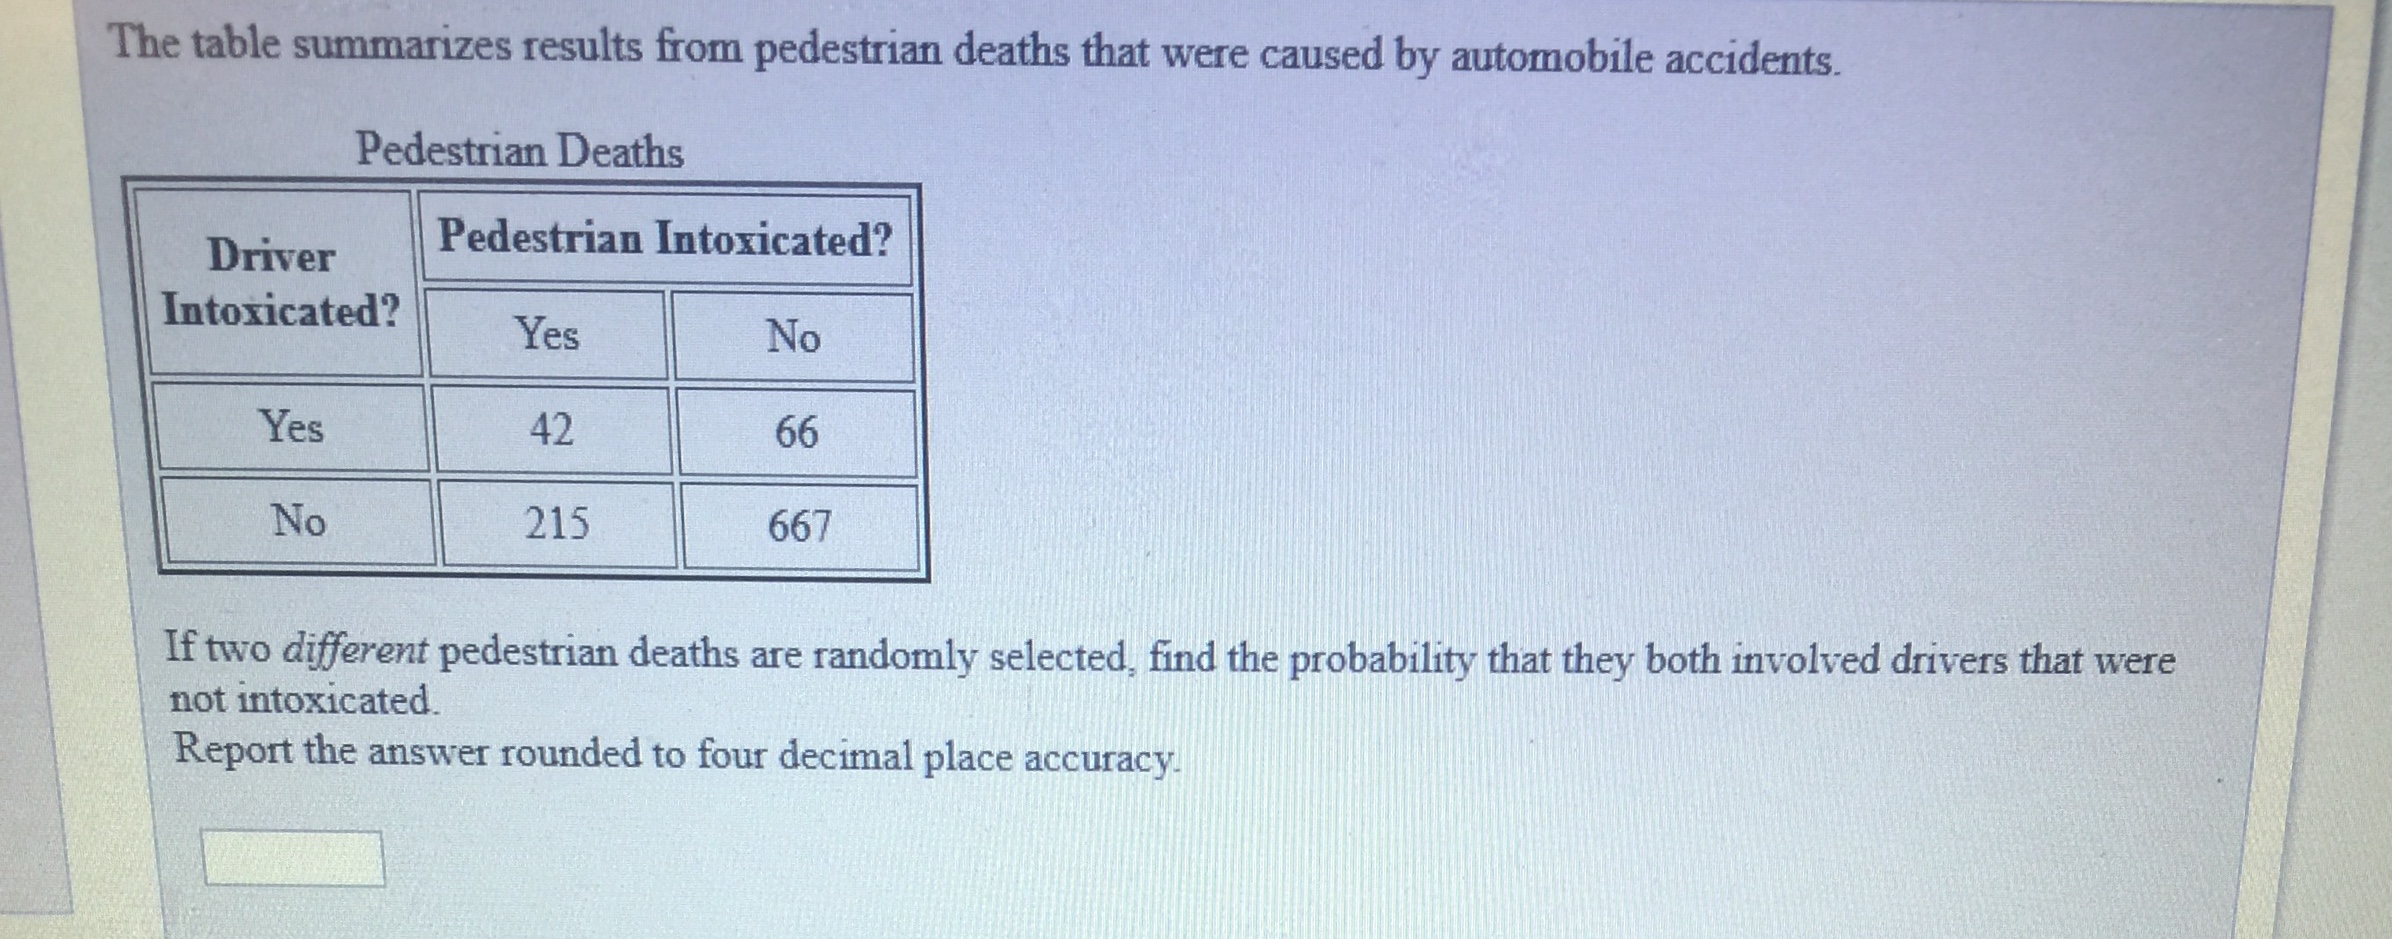 The table summarizes results from pedestrian deaths that were caused by automobile accidents.
Pedestrian Deaths
Driver Pedestrian Intoxica
Intoxicated?
Yes
42
215
No
Yes
No
667
If two different pedestrian deaths are randomly selected, find the probability that they both involved drivers that were
not intoxicated.
Report the answer rounded to four decimal place accuracy
